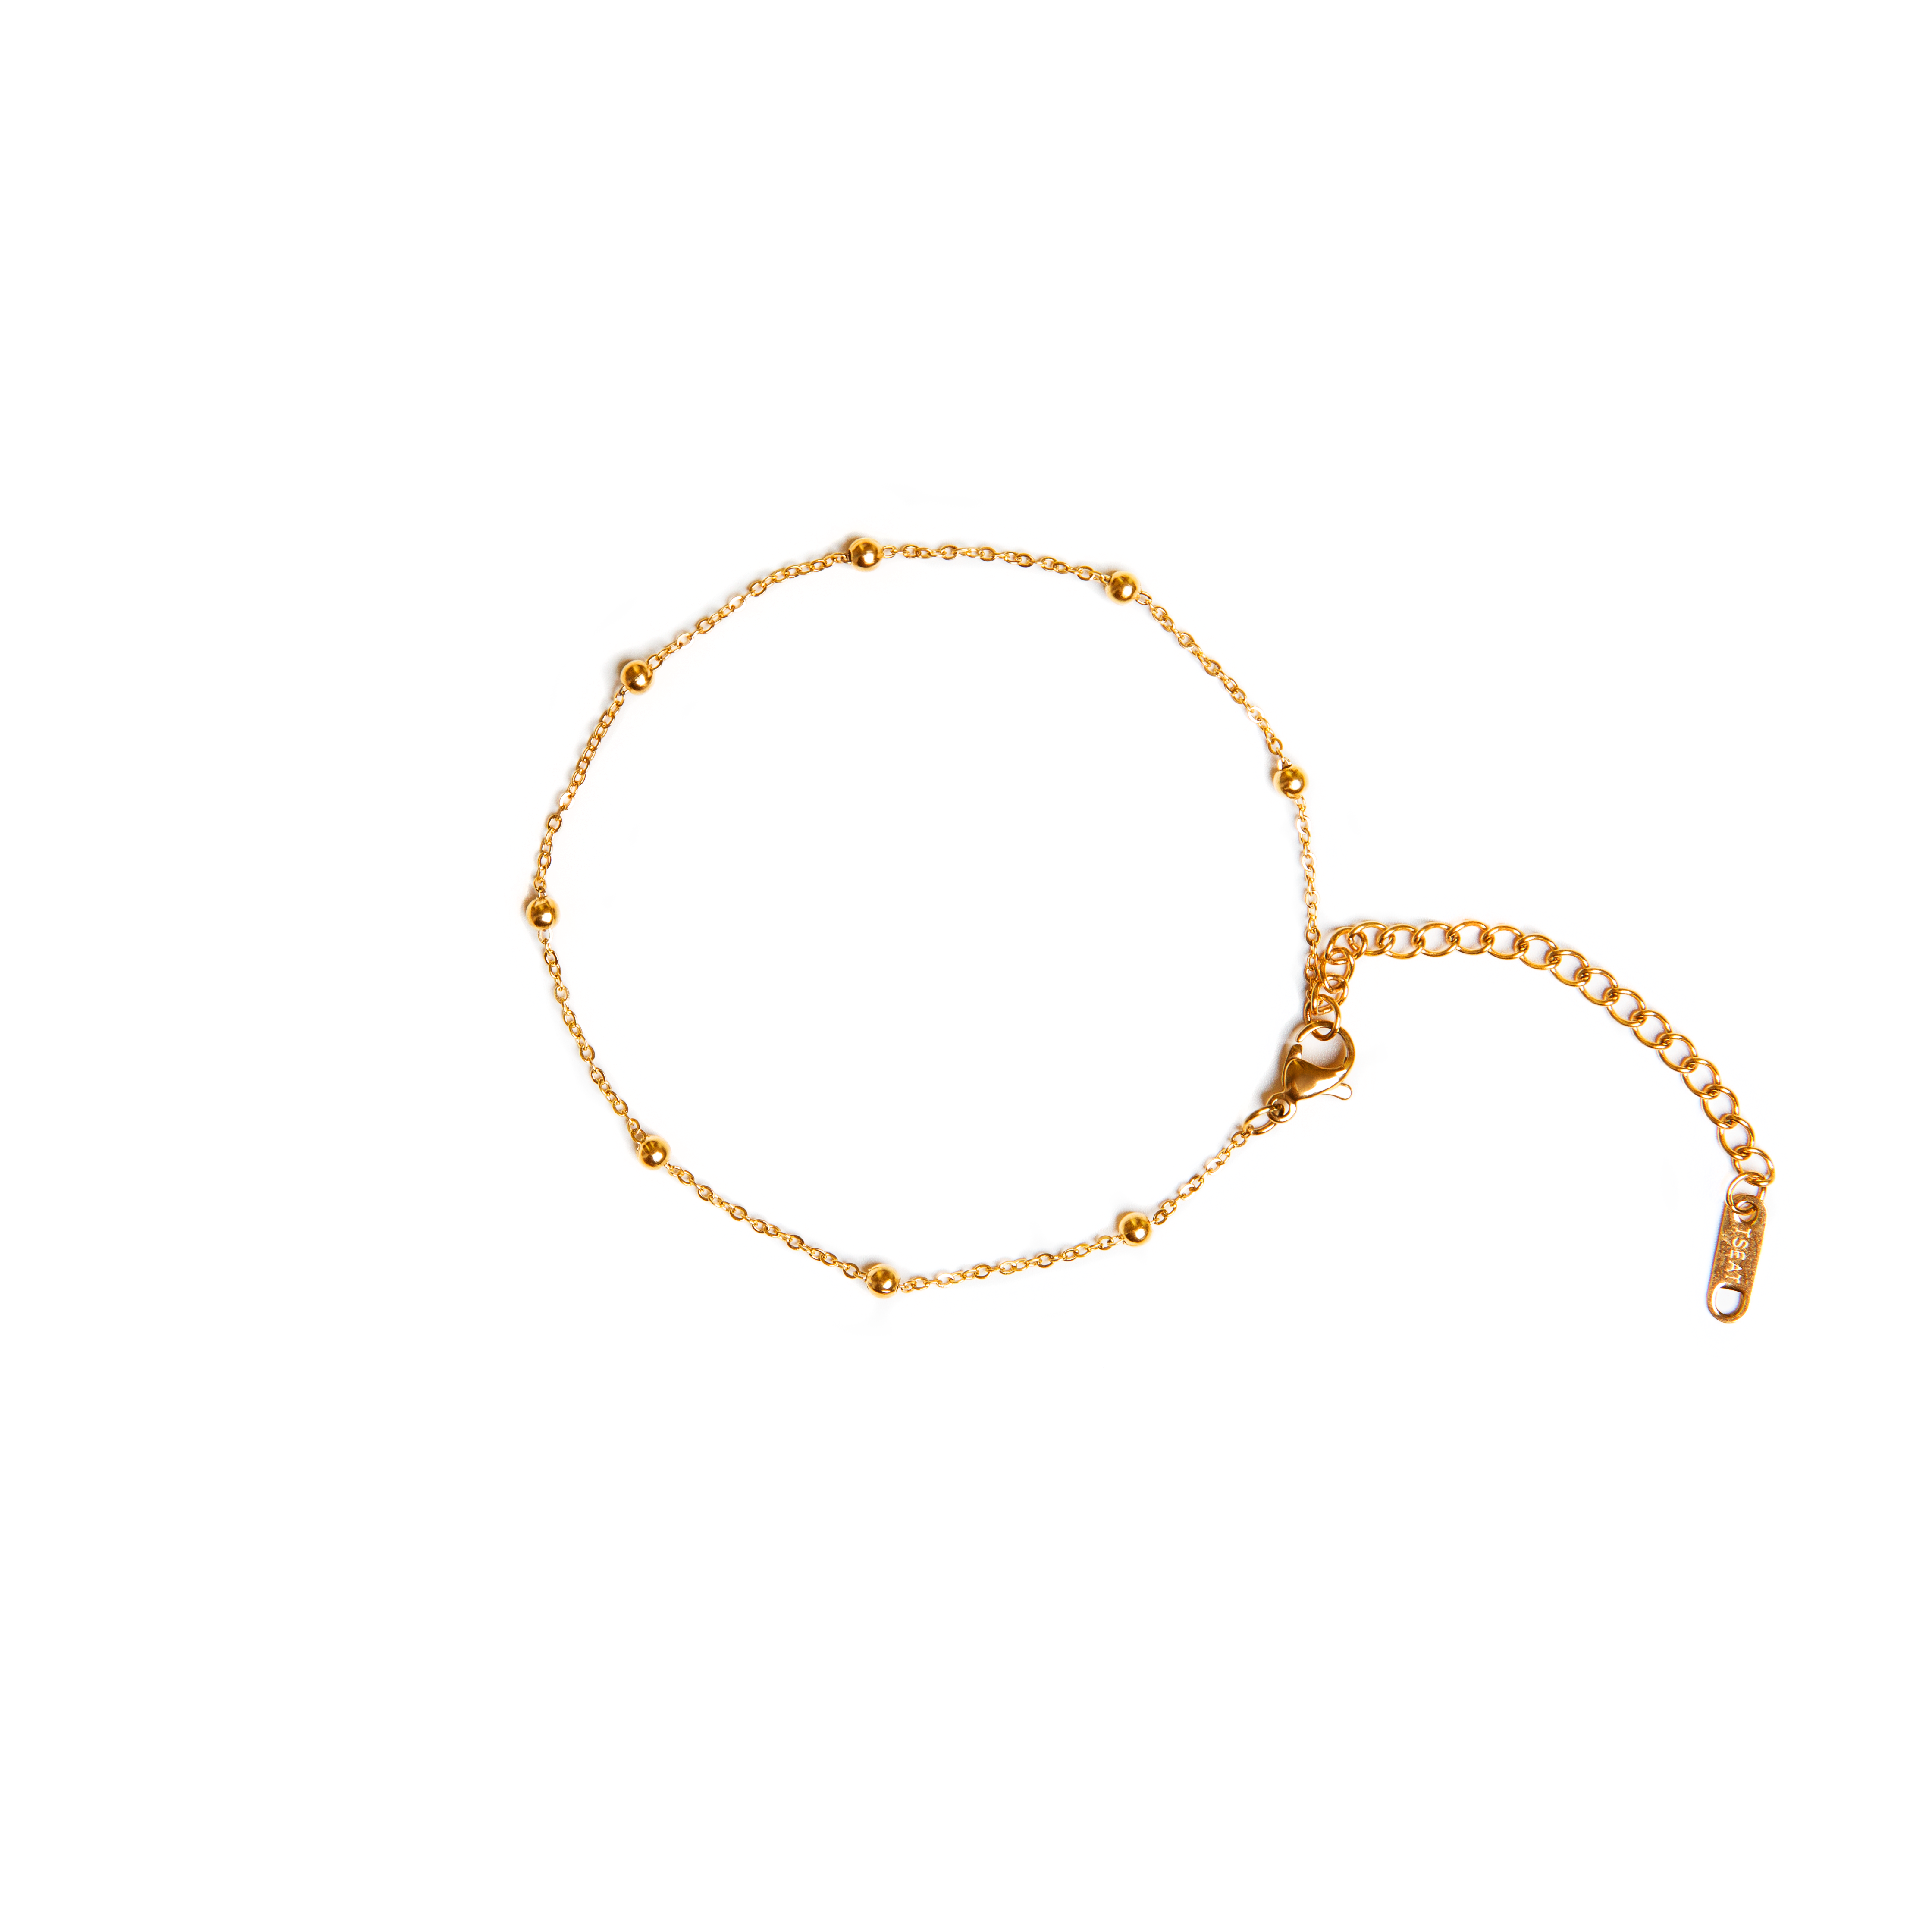 Featuring small gold beads, this anklet makes for the  perfect layering piece, or is just as cute on its own. Pair it with your favorite sandals, heels, or sneakers.    18k gold plated on stainless steel. Length: 8” Extender: 2”